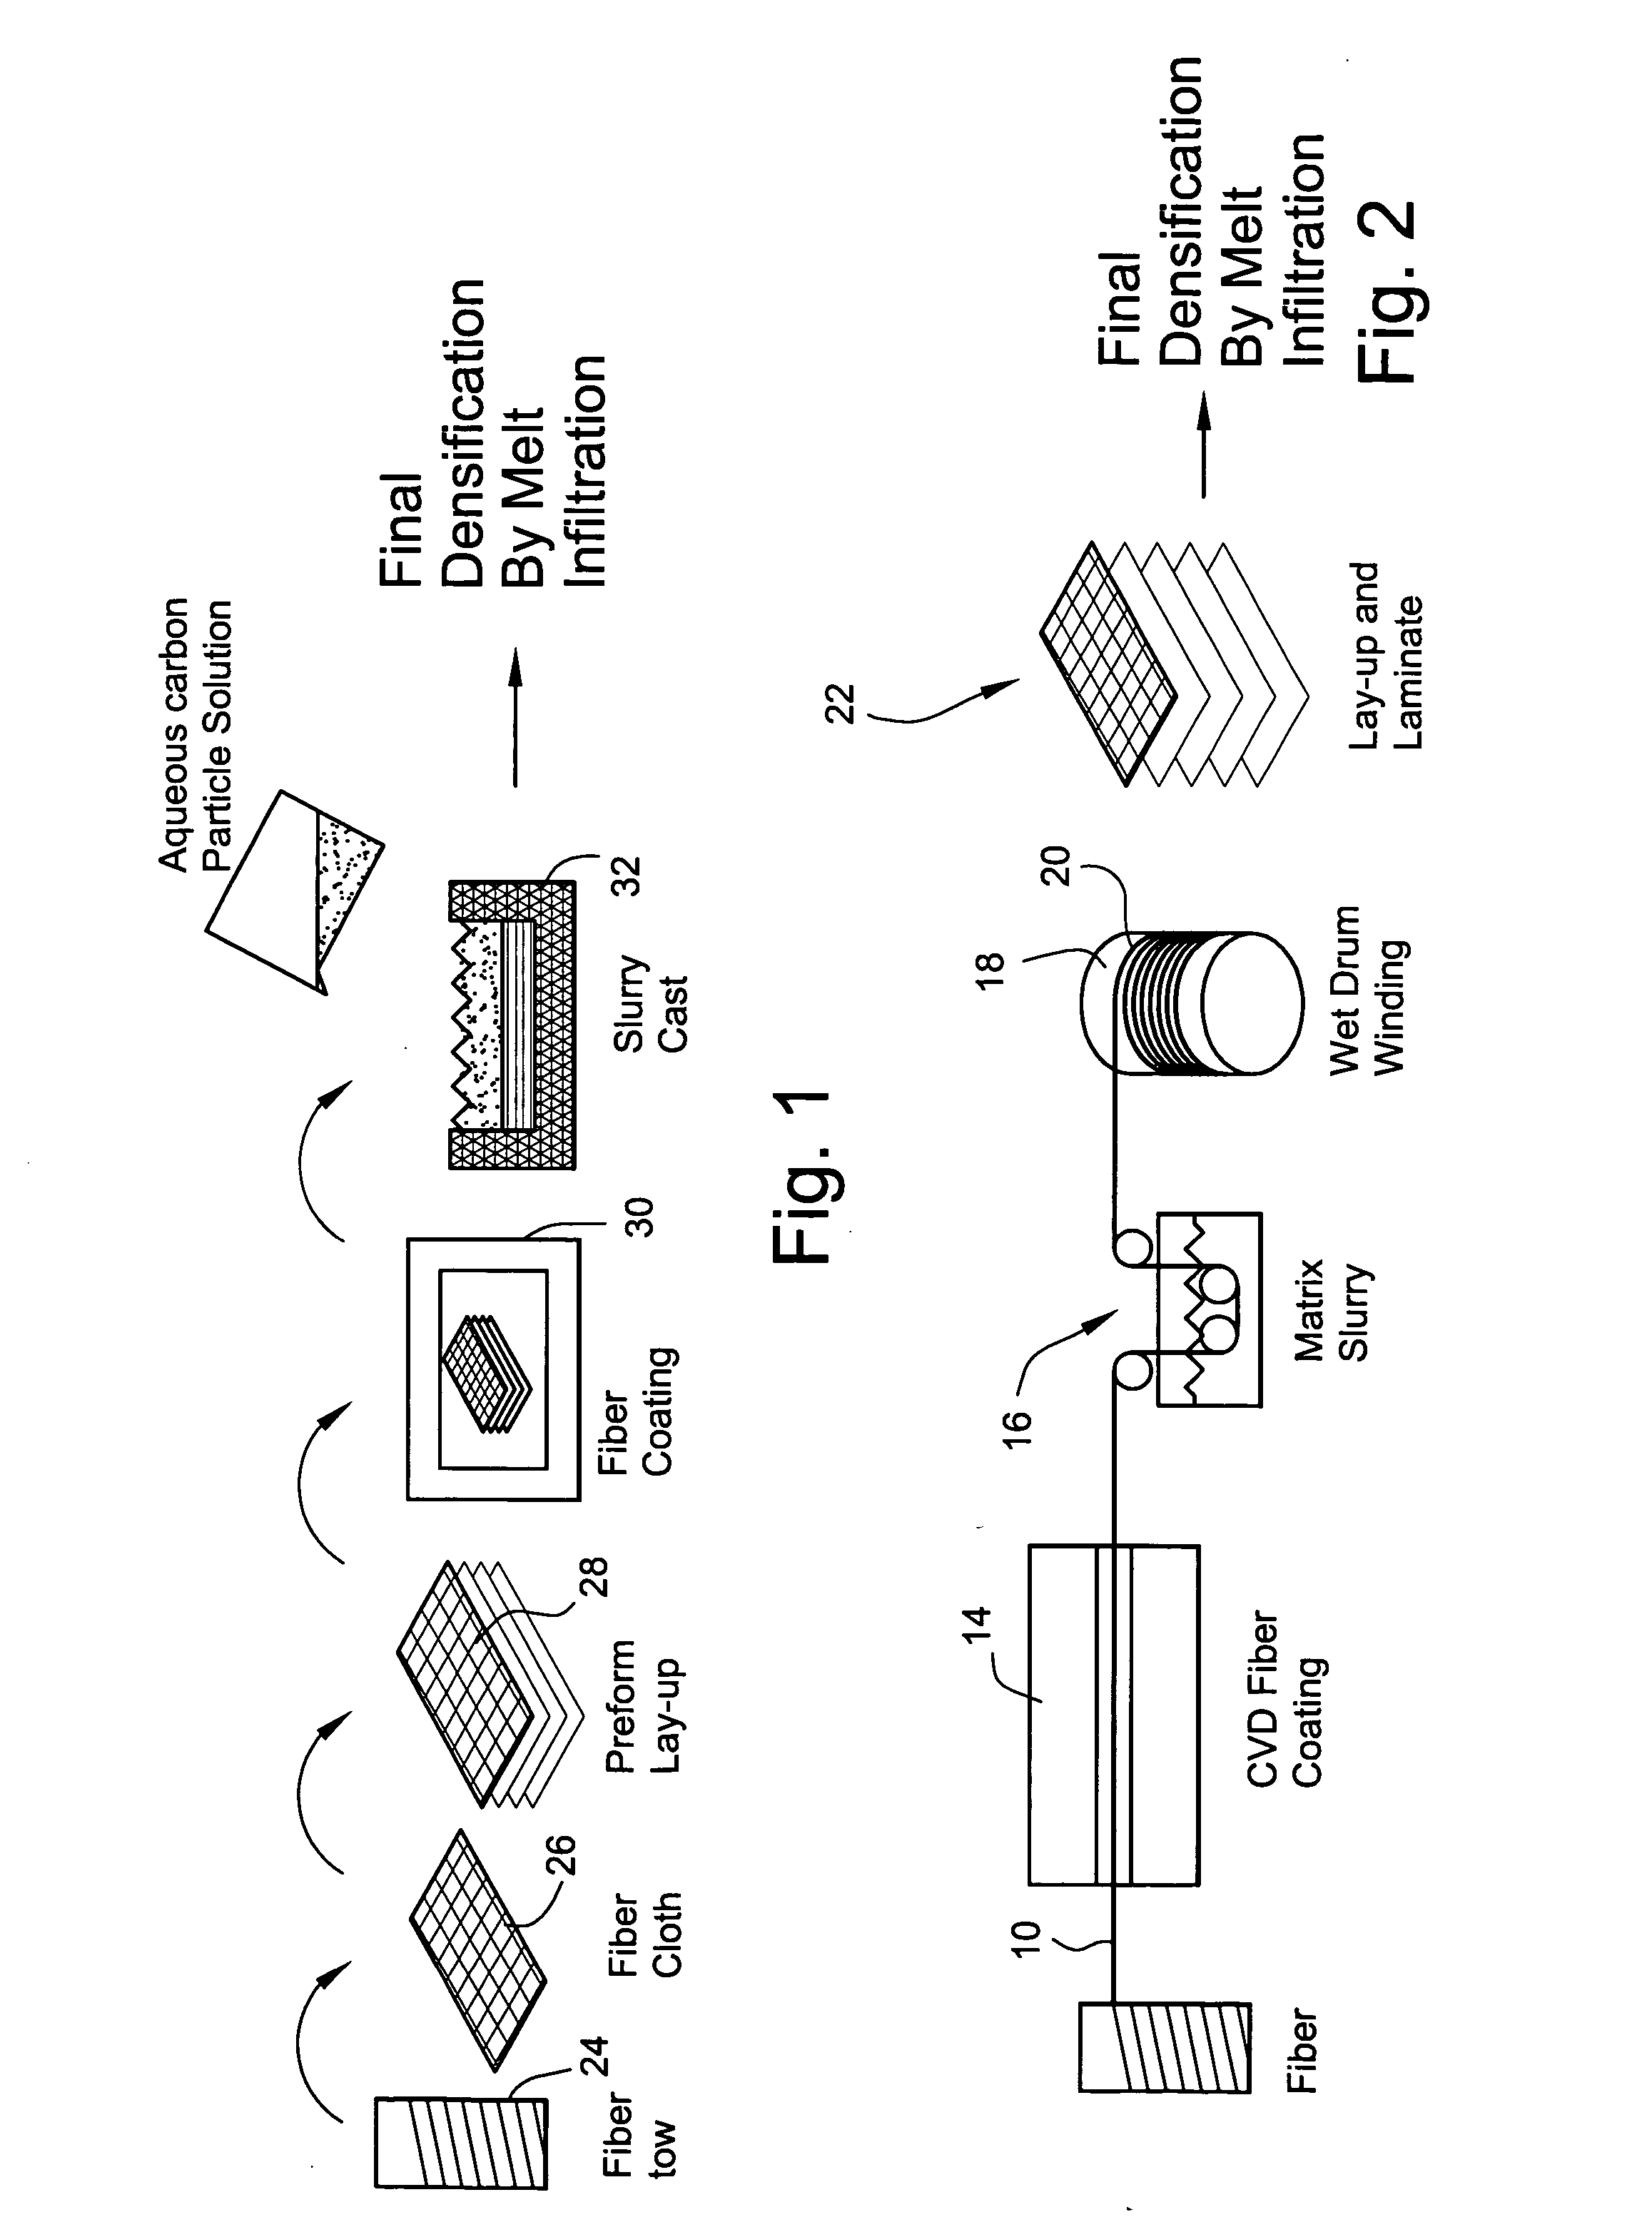 Method for performing silicon melt infiltration of ceramic matrix composites